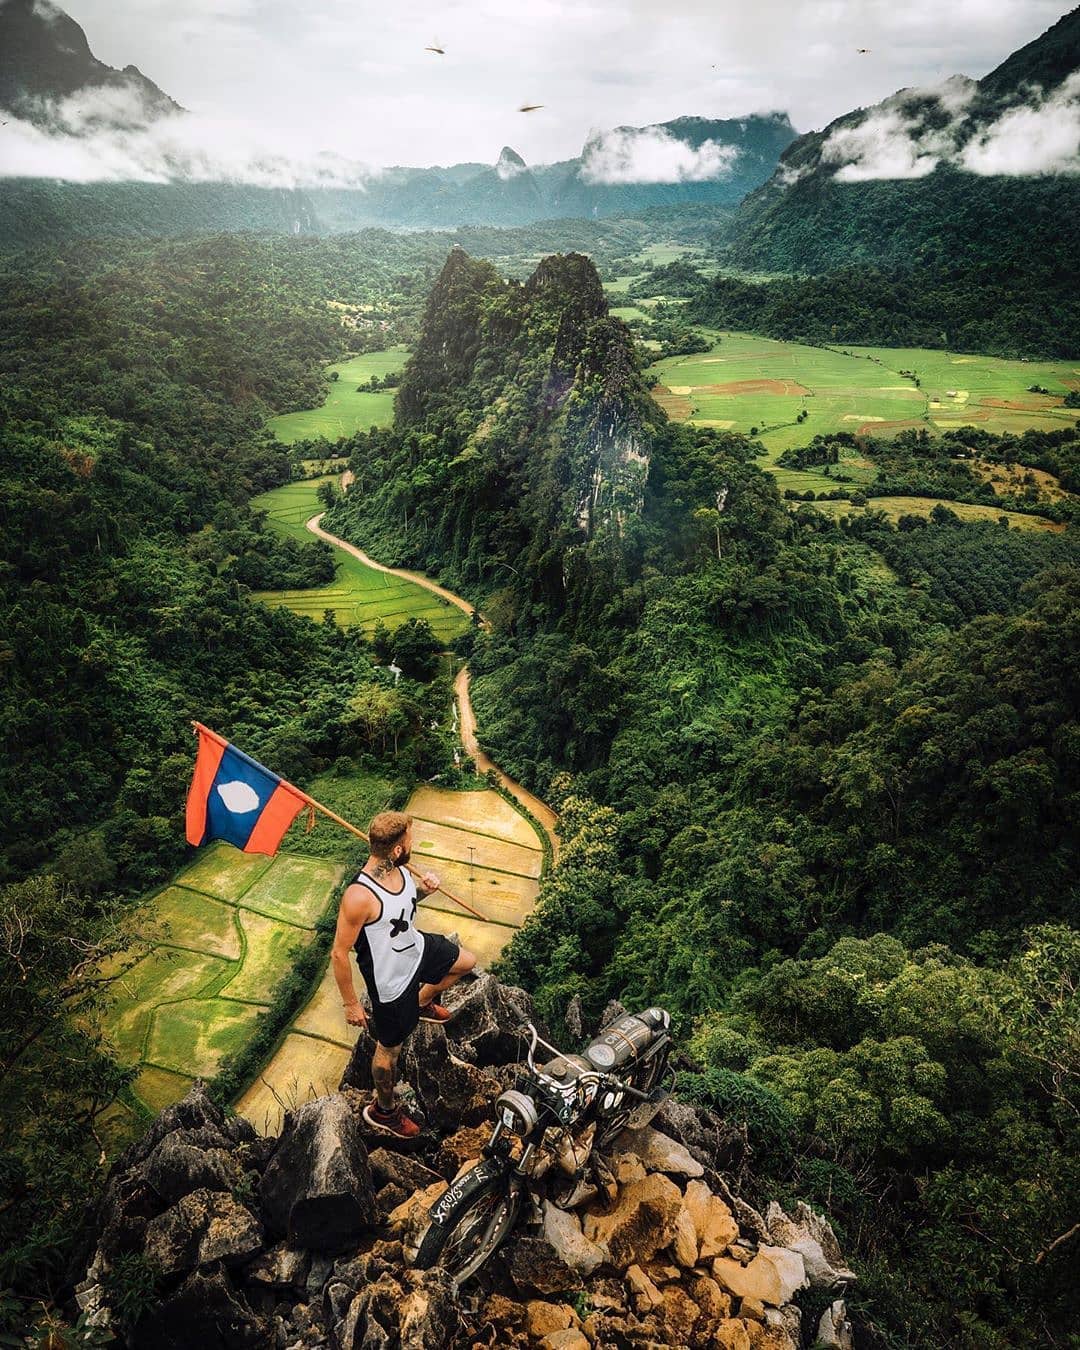 Epic viewpoints in Viangviang, Laos by @steven.davignon . ☝️ Follow the featured feed for more. And tag your friends in the comments